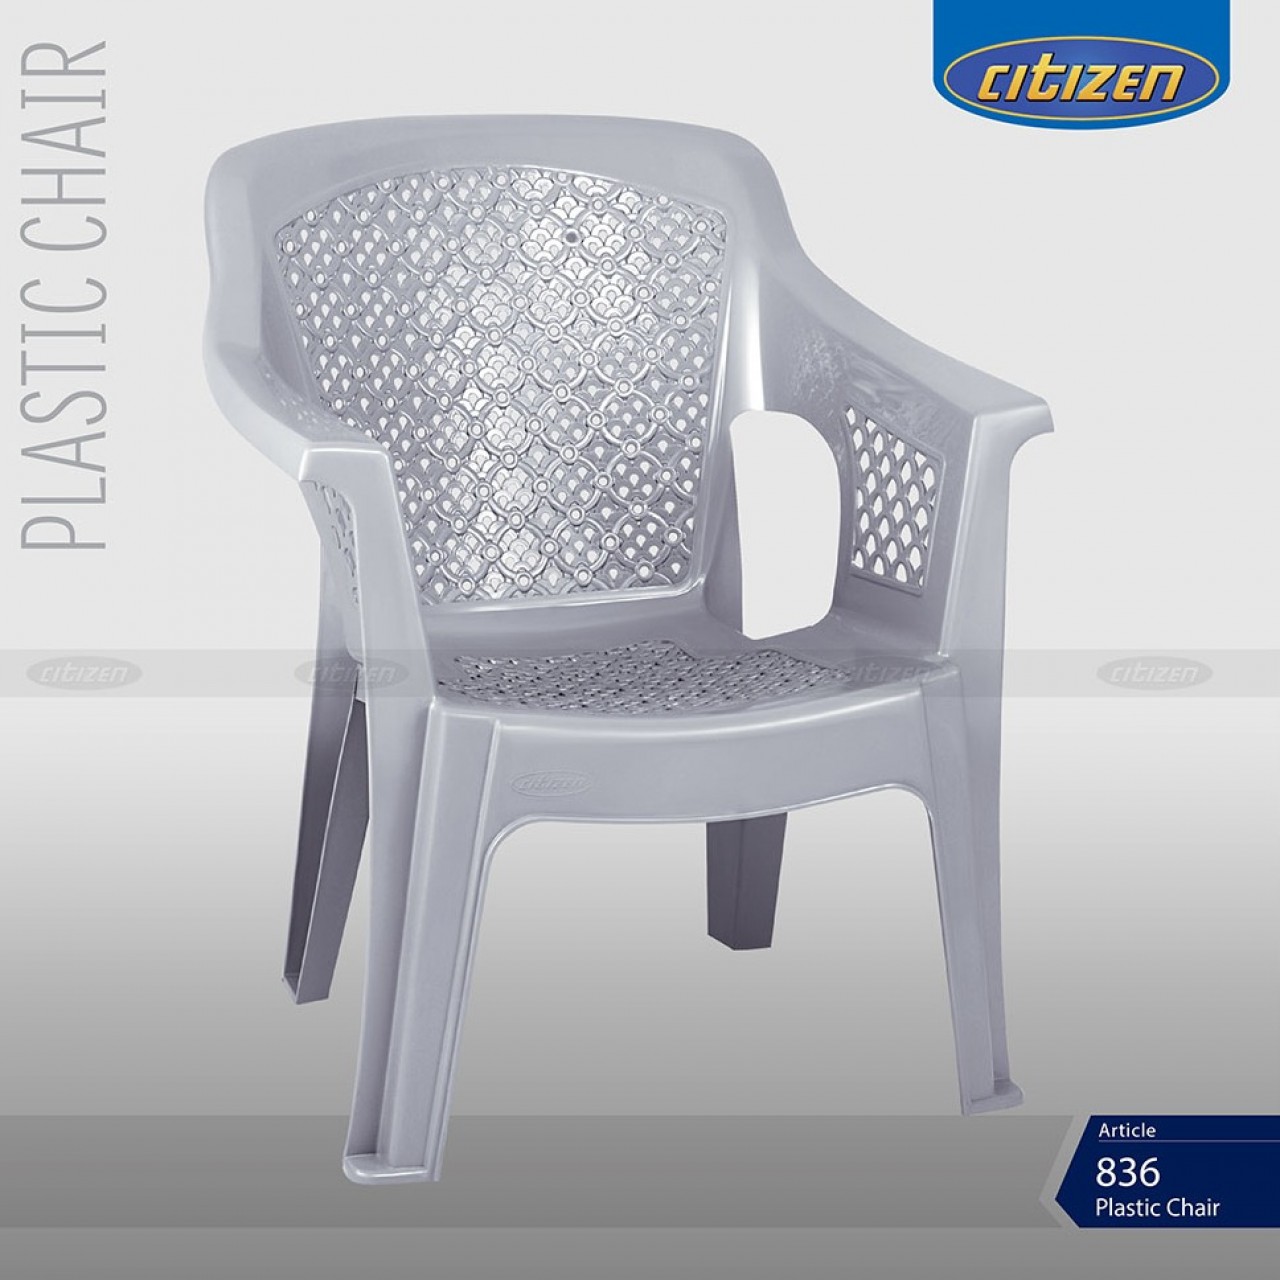 Citizen 836 Plastic Regular Chair With Arms